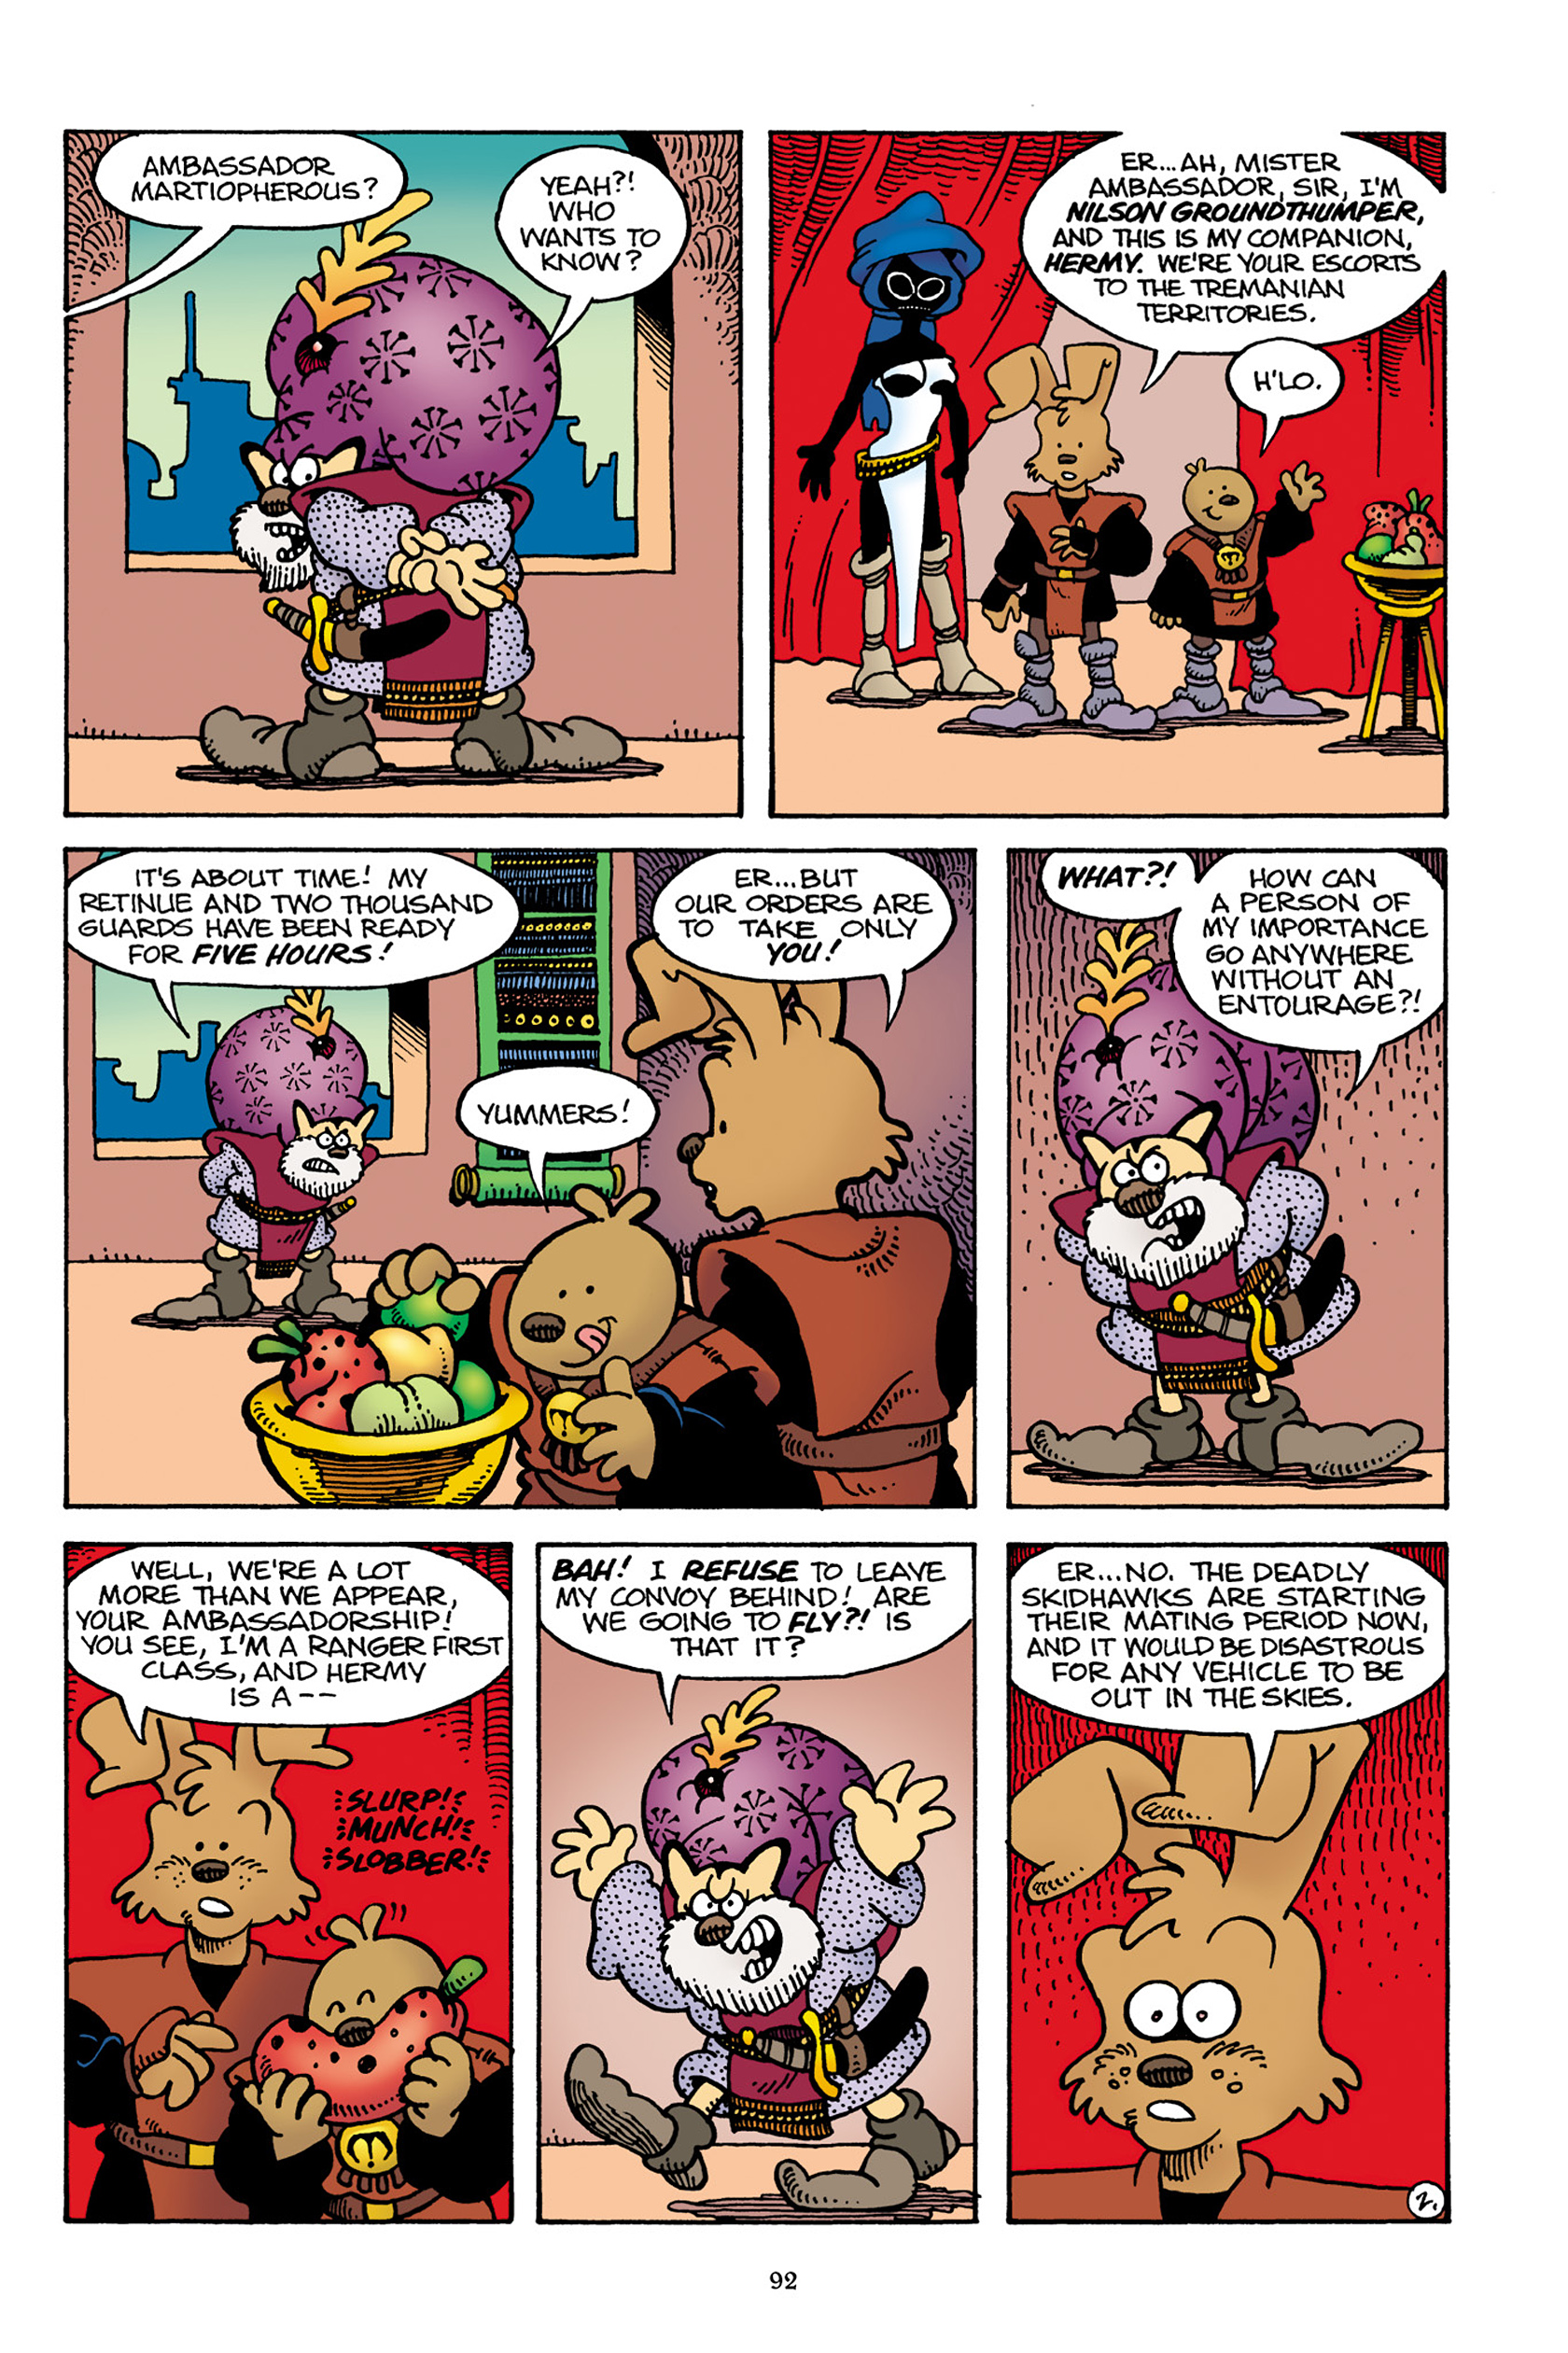 The Adventures of Nilson Groundthumper and Hermy TPB #1 - English 90